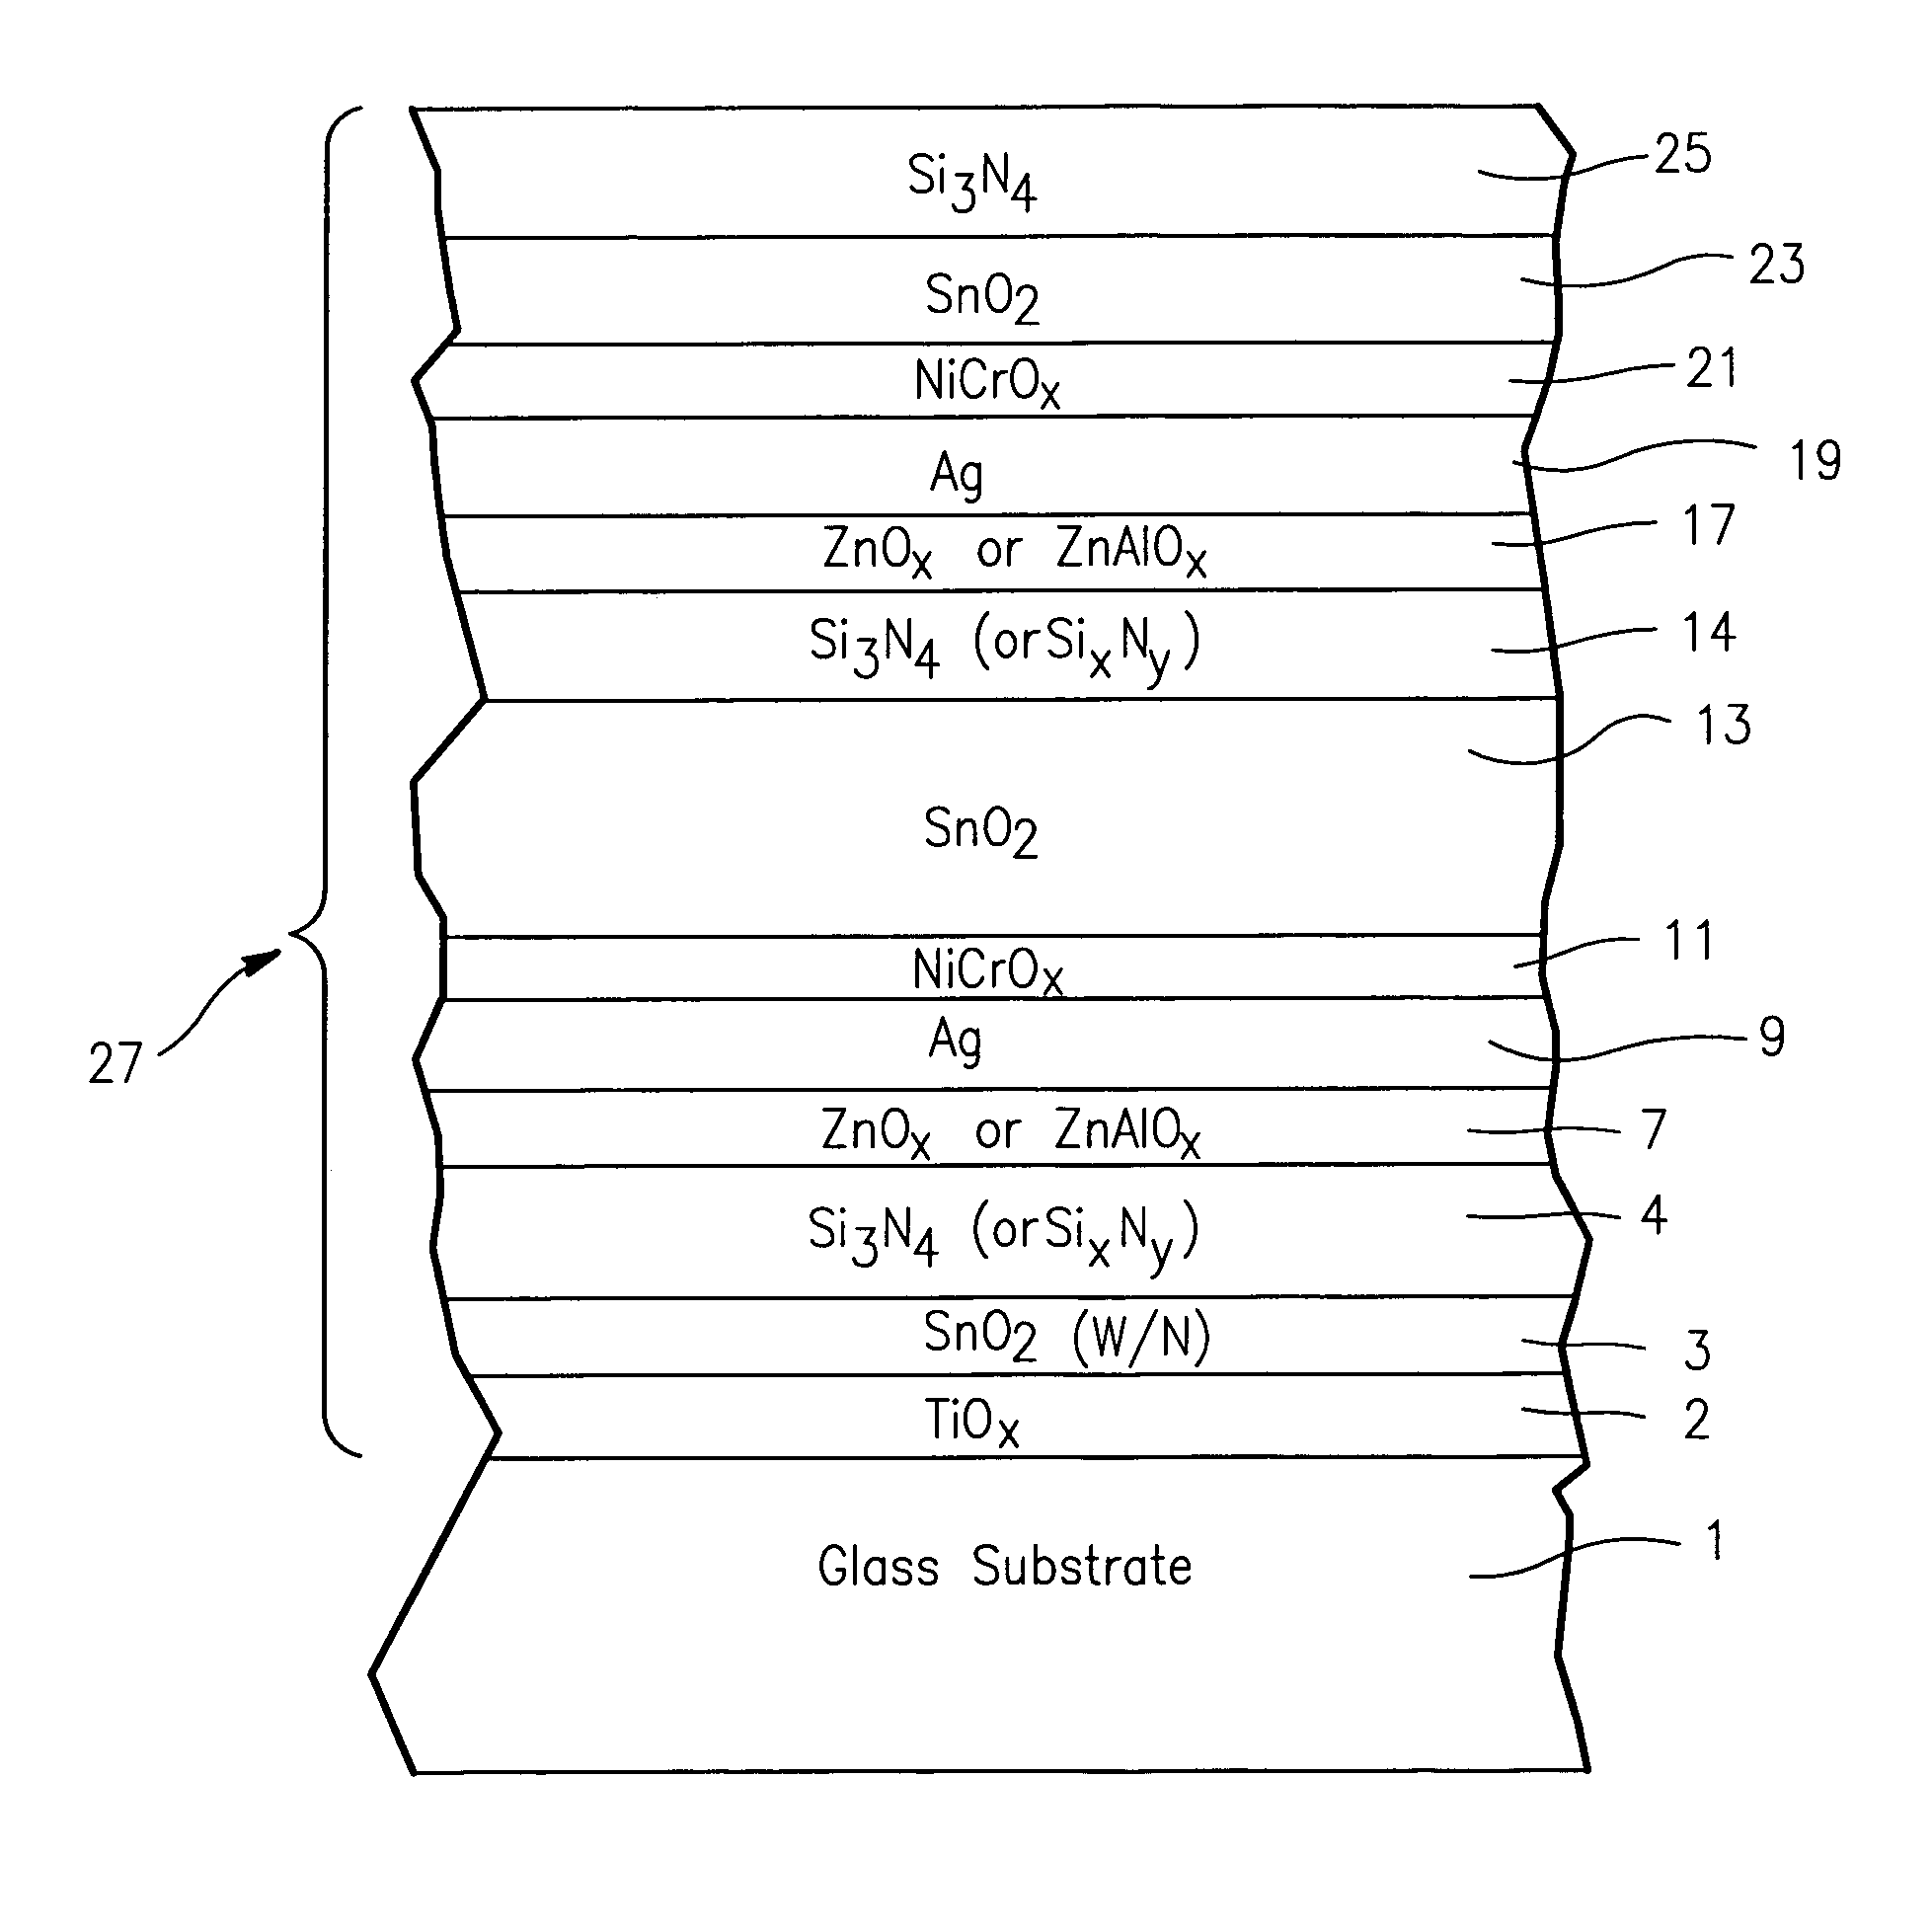 Heat treatable coated article with tin oxide inclusive layer between titanium oxide and silicon nitride